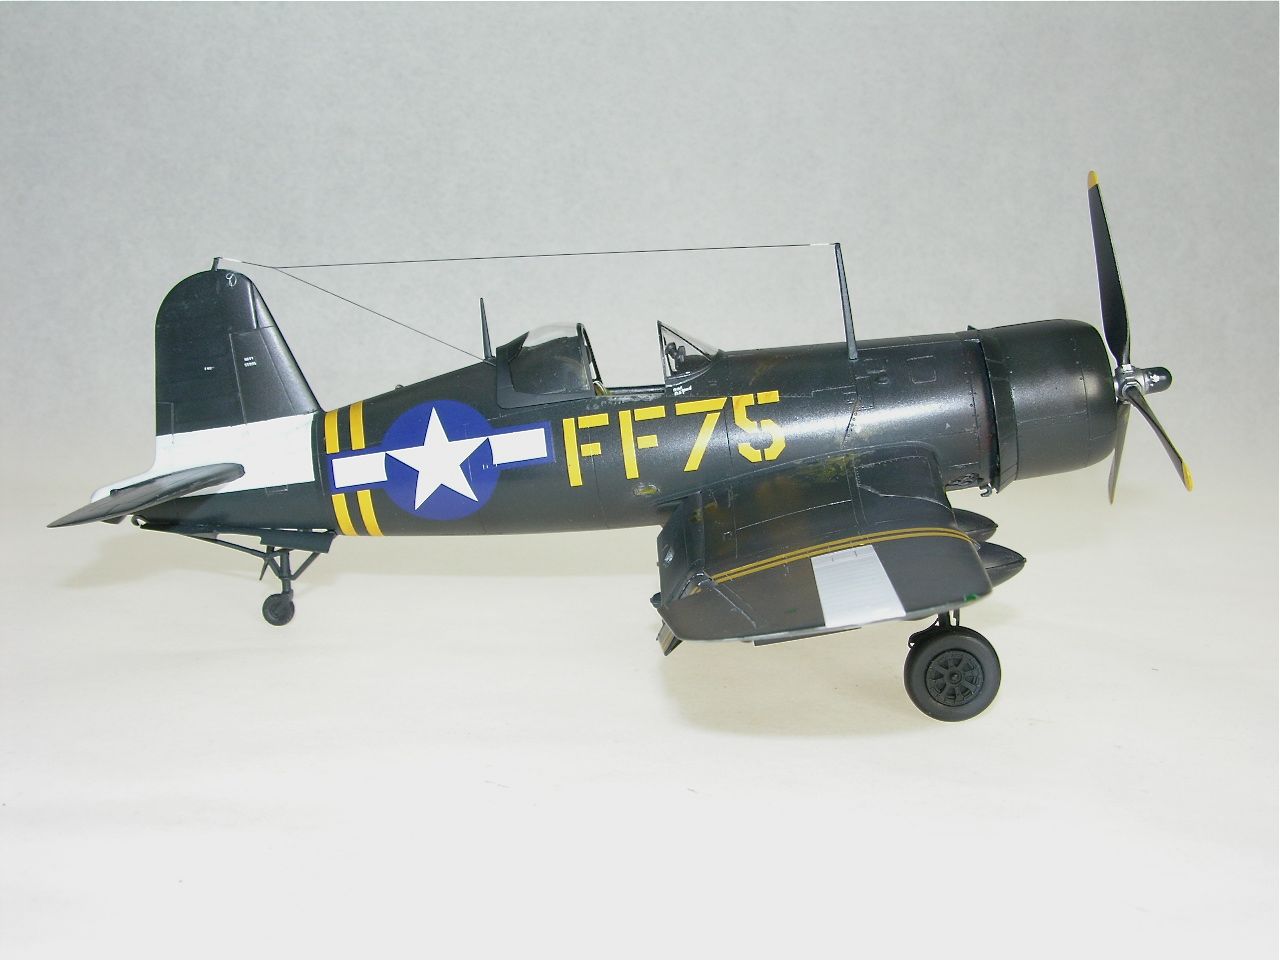 F4U-1D Corsair (Tamiya)
This is the Tamiya F4U-1D Corsair finished as Lt. Col. Donald Yost's airplane of VMF 351 from USS Cape Gloucester, ca. August, 1945. Decals are from BaracudaCals, interior details are Eduard.
